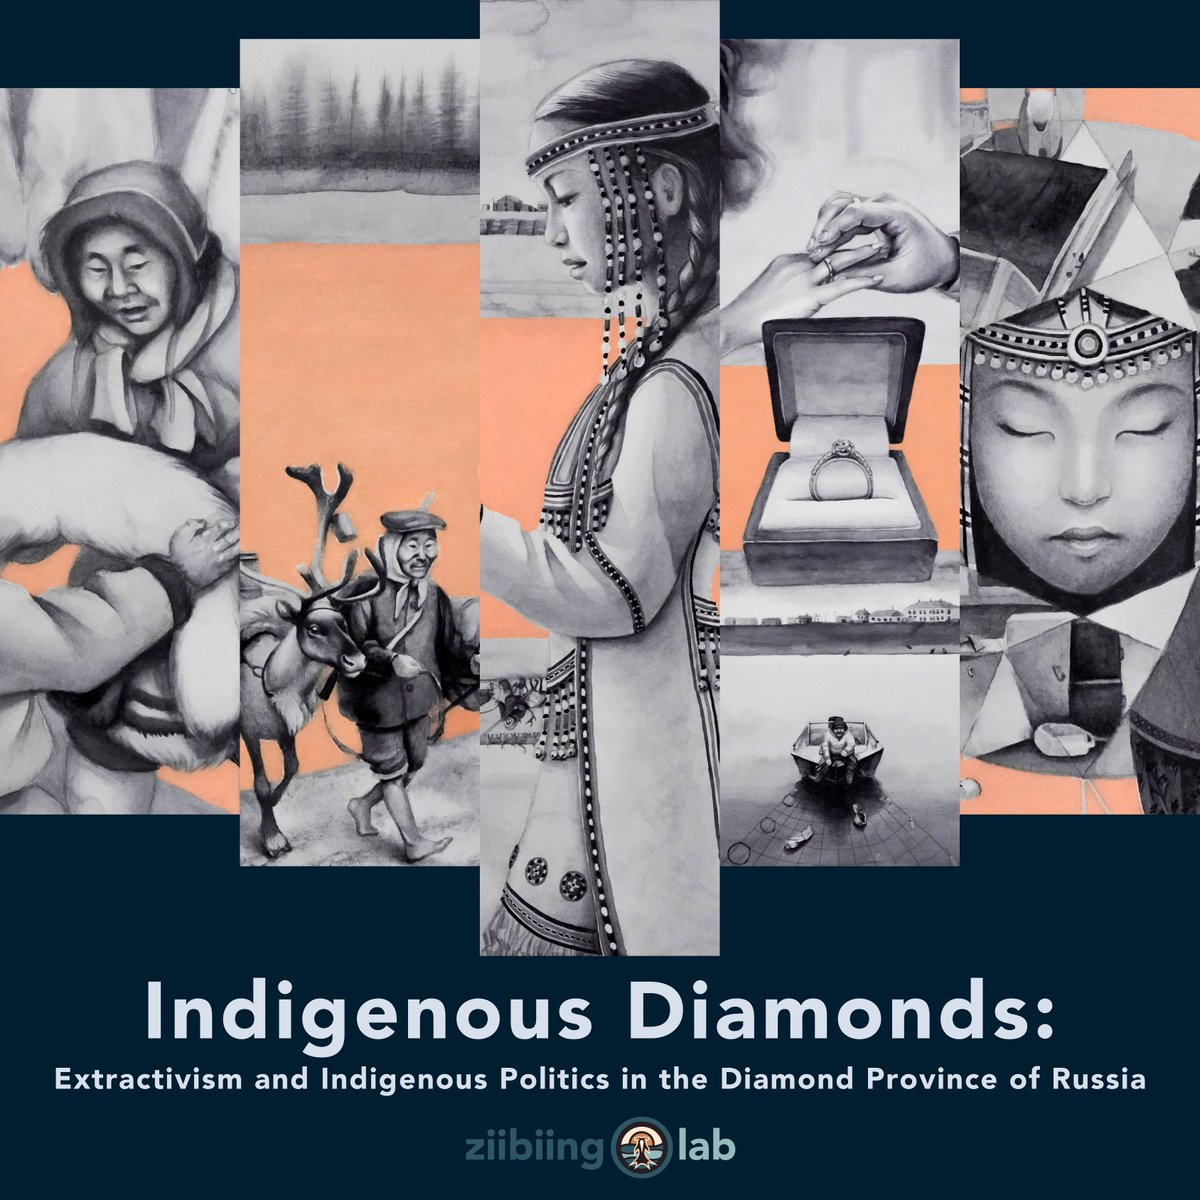 🥳Ziibiing Lab's first special study on global Indigenous politics is available now! 'Indigenous Diamonds: Extractivism and Indigenous Politics in the Diamond Province of Russia' by Sardana Nikolaeva (@apples1eater) Read here: ziibiinglab.org/indigenous-dia… #HappyValentinesDay